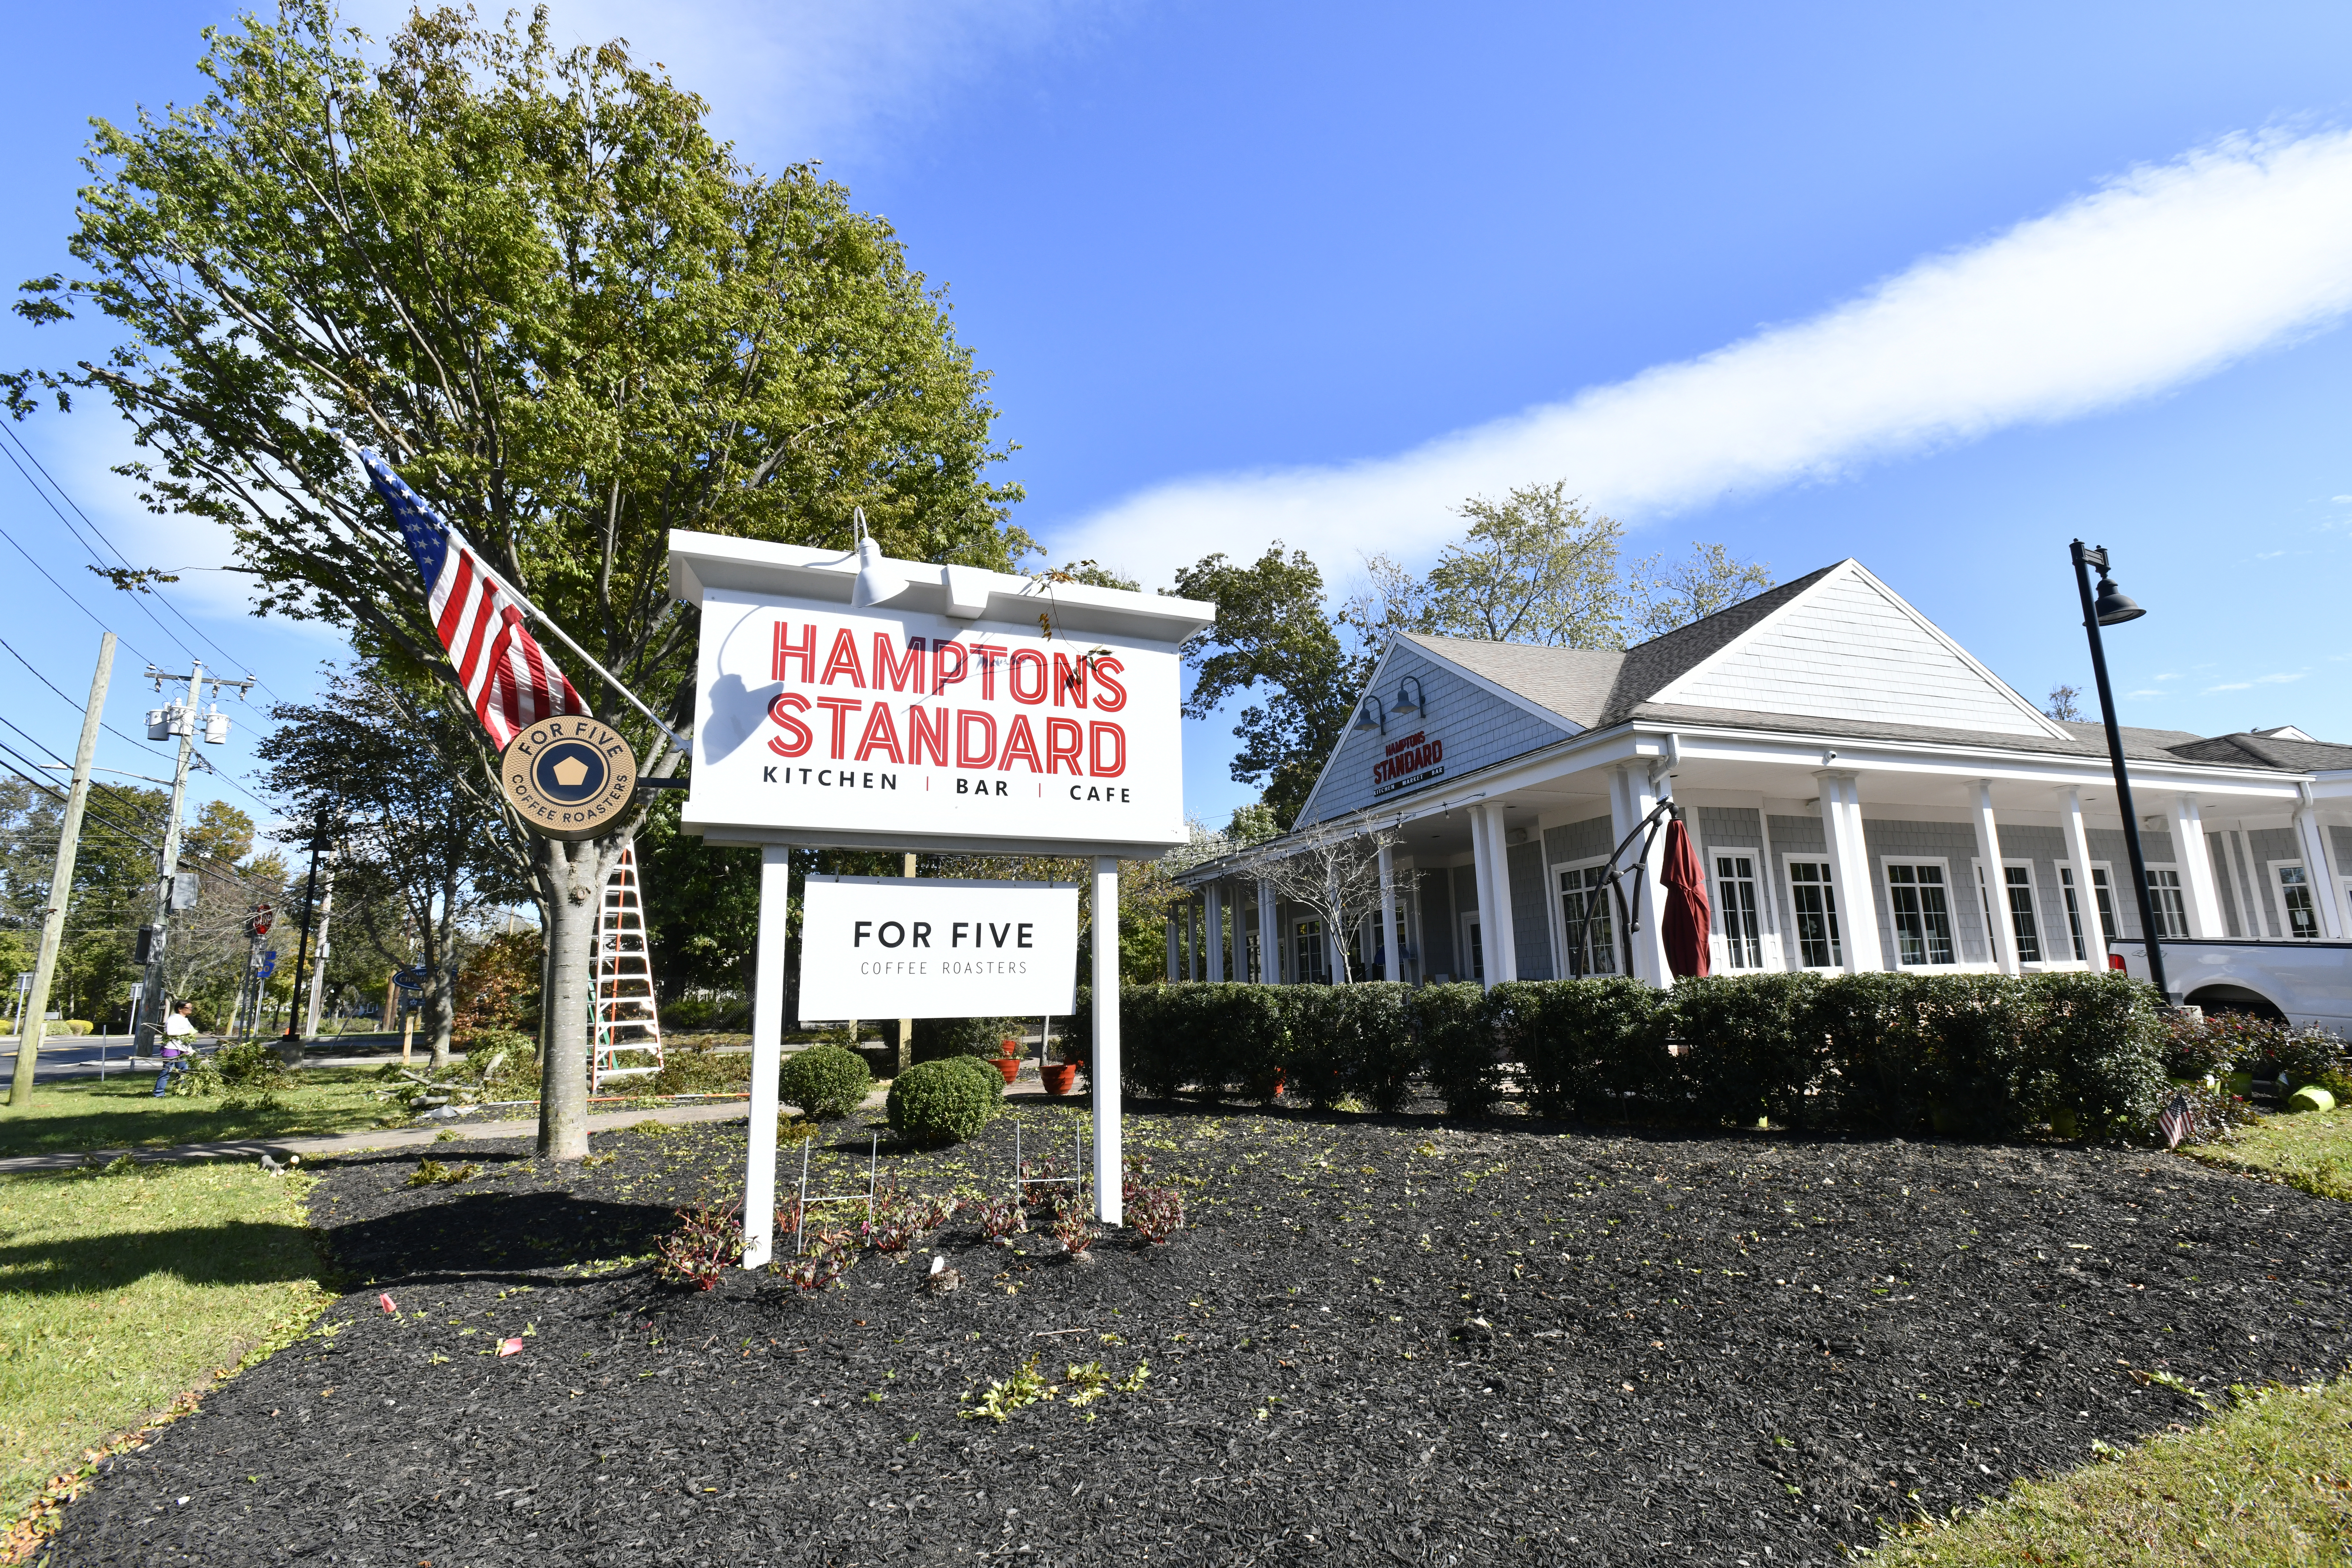 The Hamptons Standard is undergoing renovations to make the restaurant more family-friendly. The coffee bar will remain open throughout the renovations. DANA SHAW